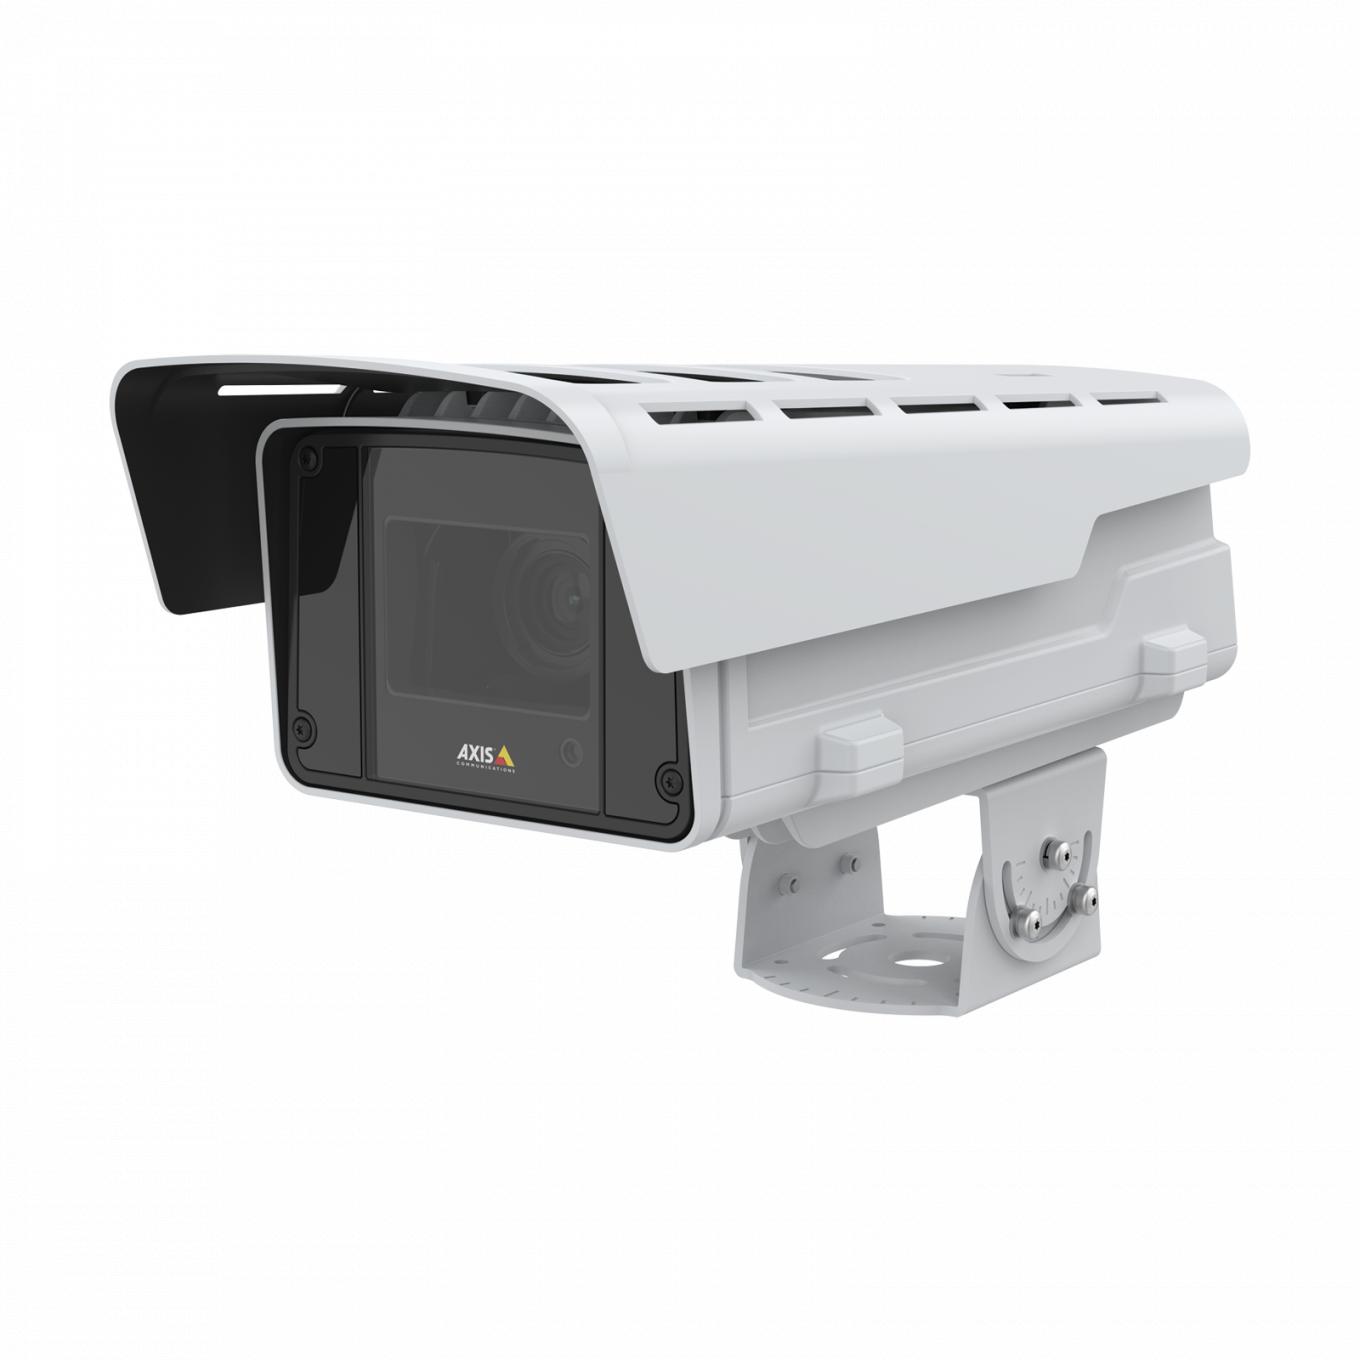 AXIS TQ1501-E Crane and Traffic Mount con AXIS Q1615-LE MkIII Network Camera